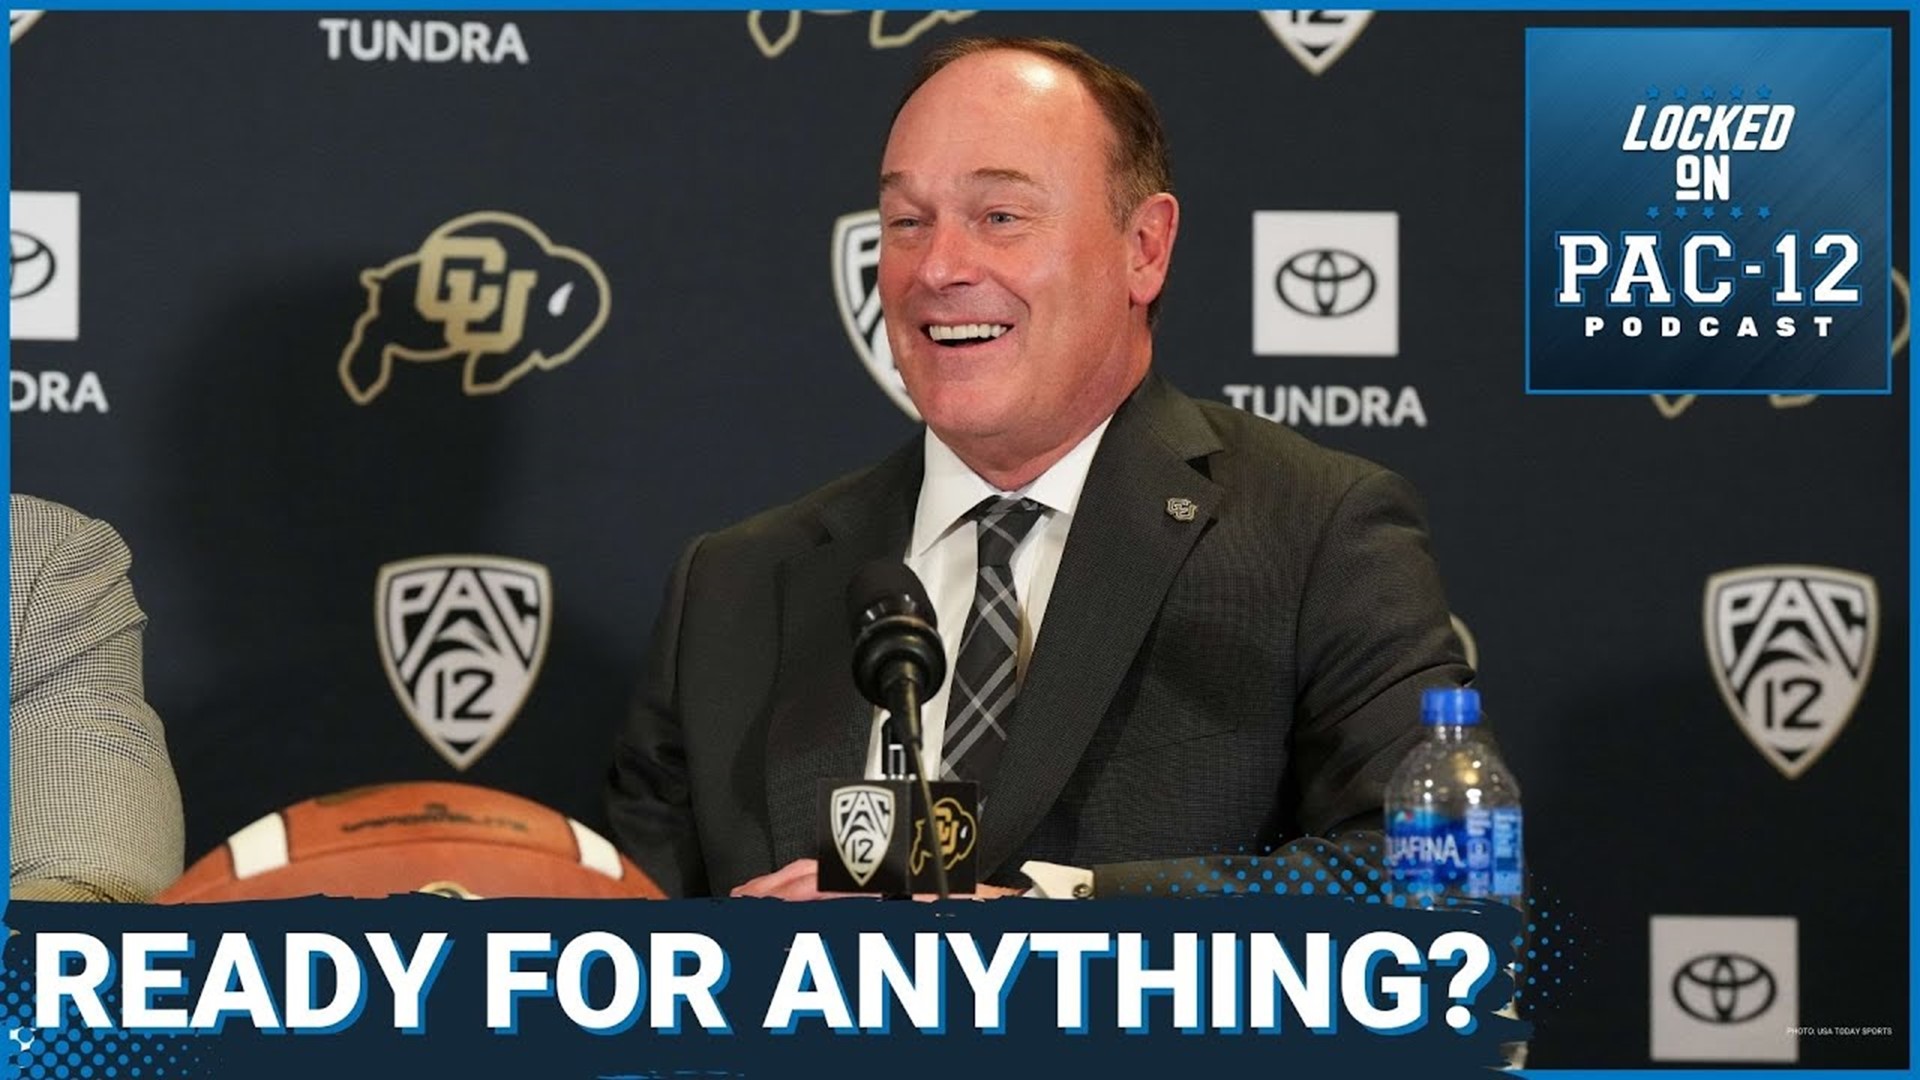 Colorado's Athletic Director, Rick George, spoke recently about Colorado's desired future. He gave us the most clear indication to date about realignment